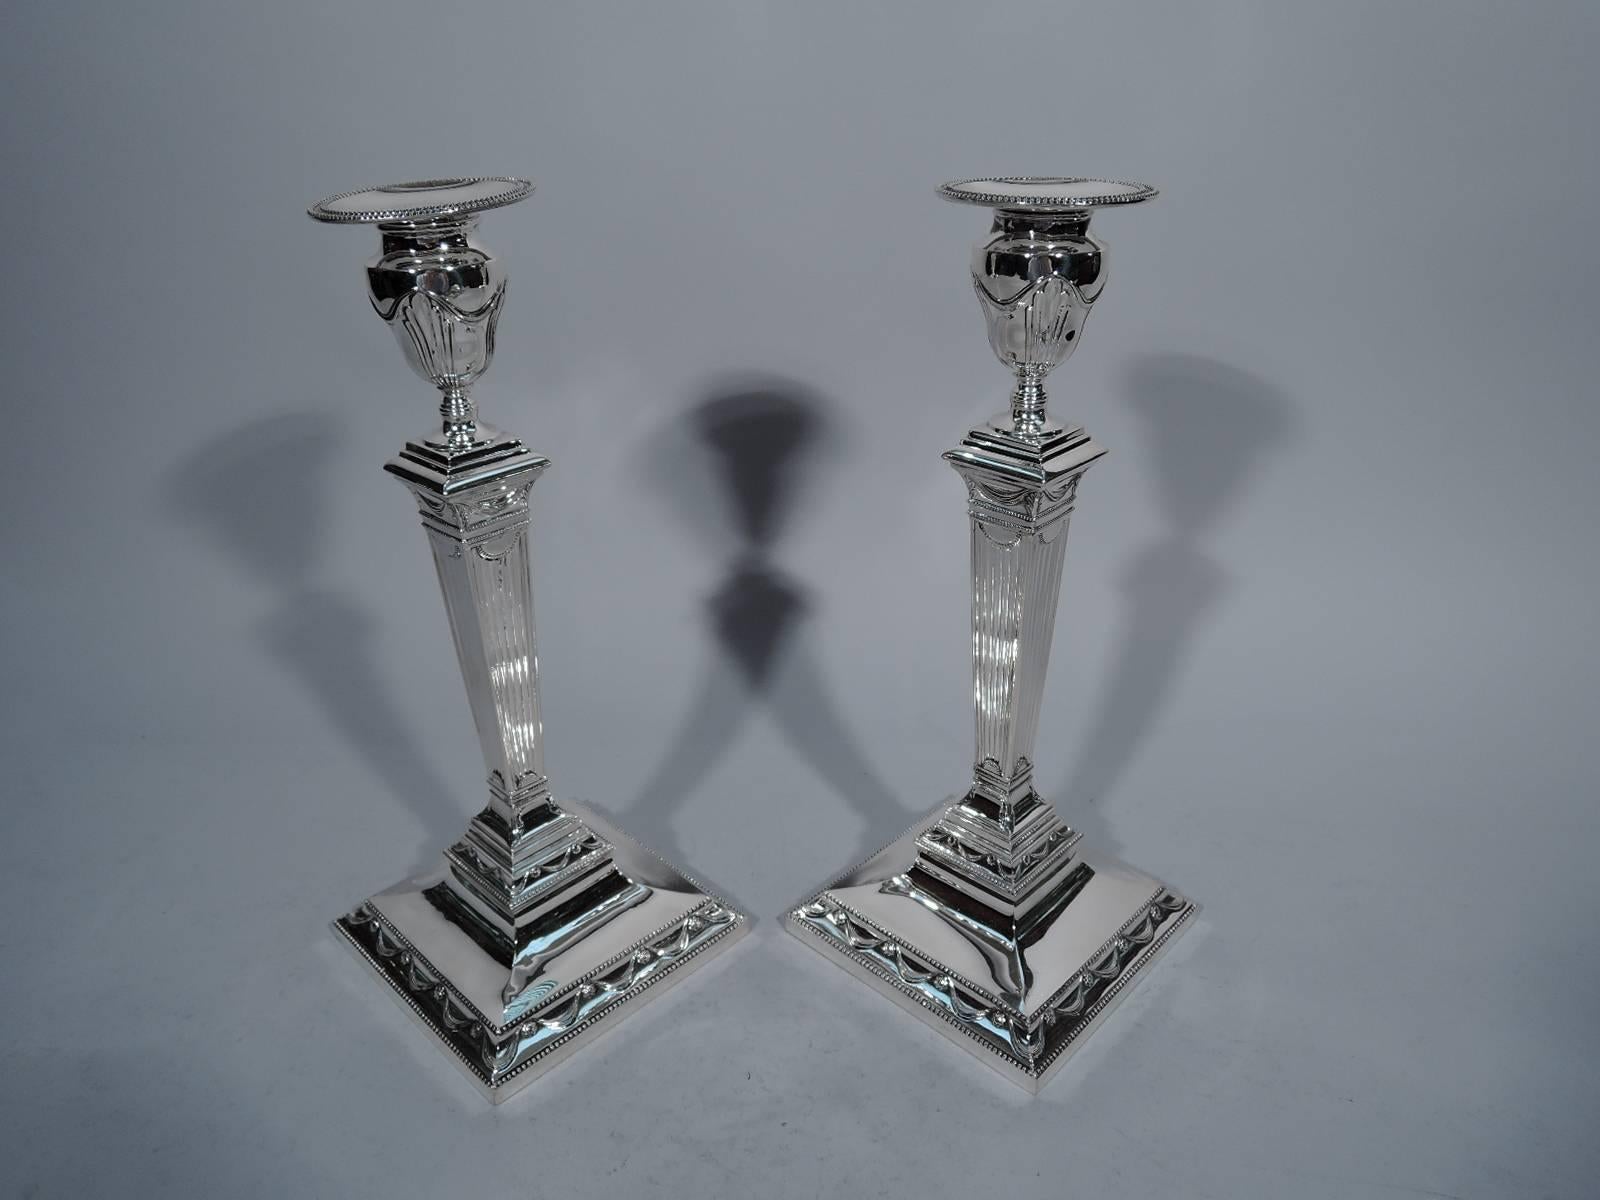 Pair of neoclassical sterling silver candlesticks. Made by Tiffany & Co. in New York, circa 1930. Tapering and reeded pillar on stepped square base. Urn socket with detachable bobeche. Beading, swags, and rosettes. The pattern (no. 21517) was first